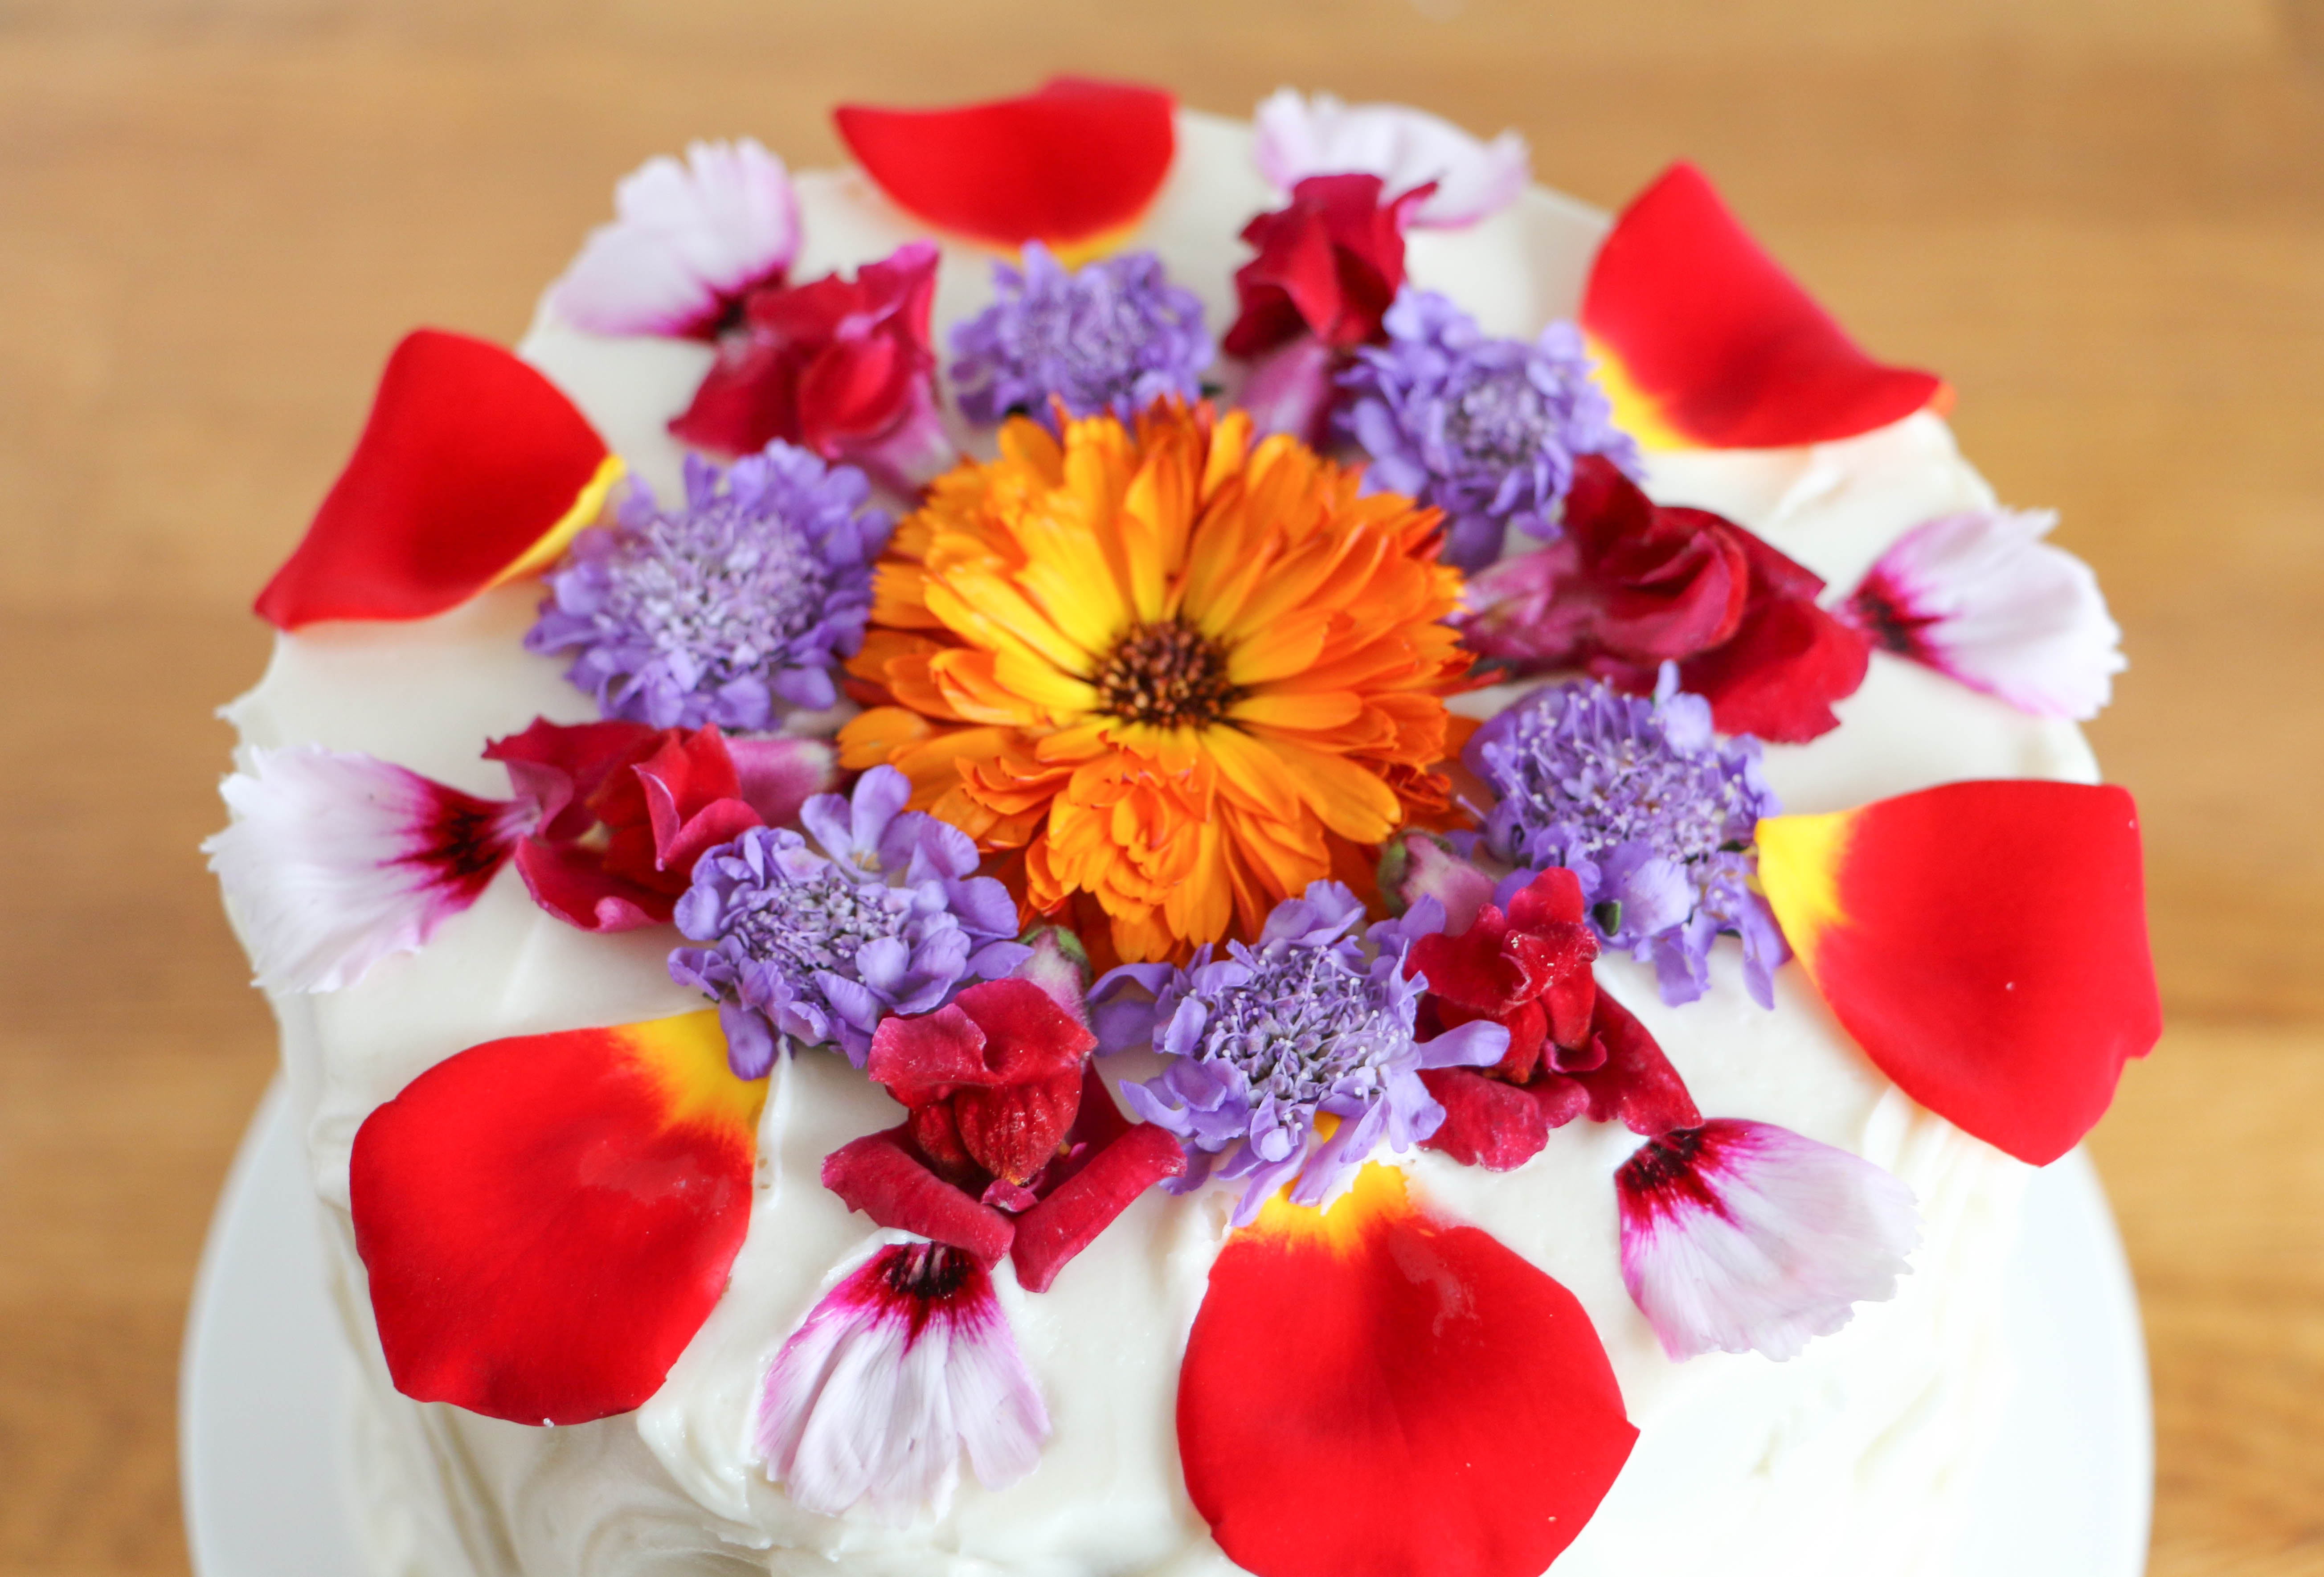 Edible Flower Cake Decorating Guide